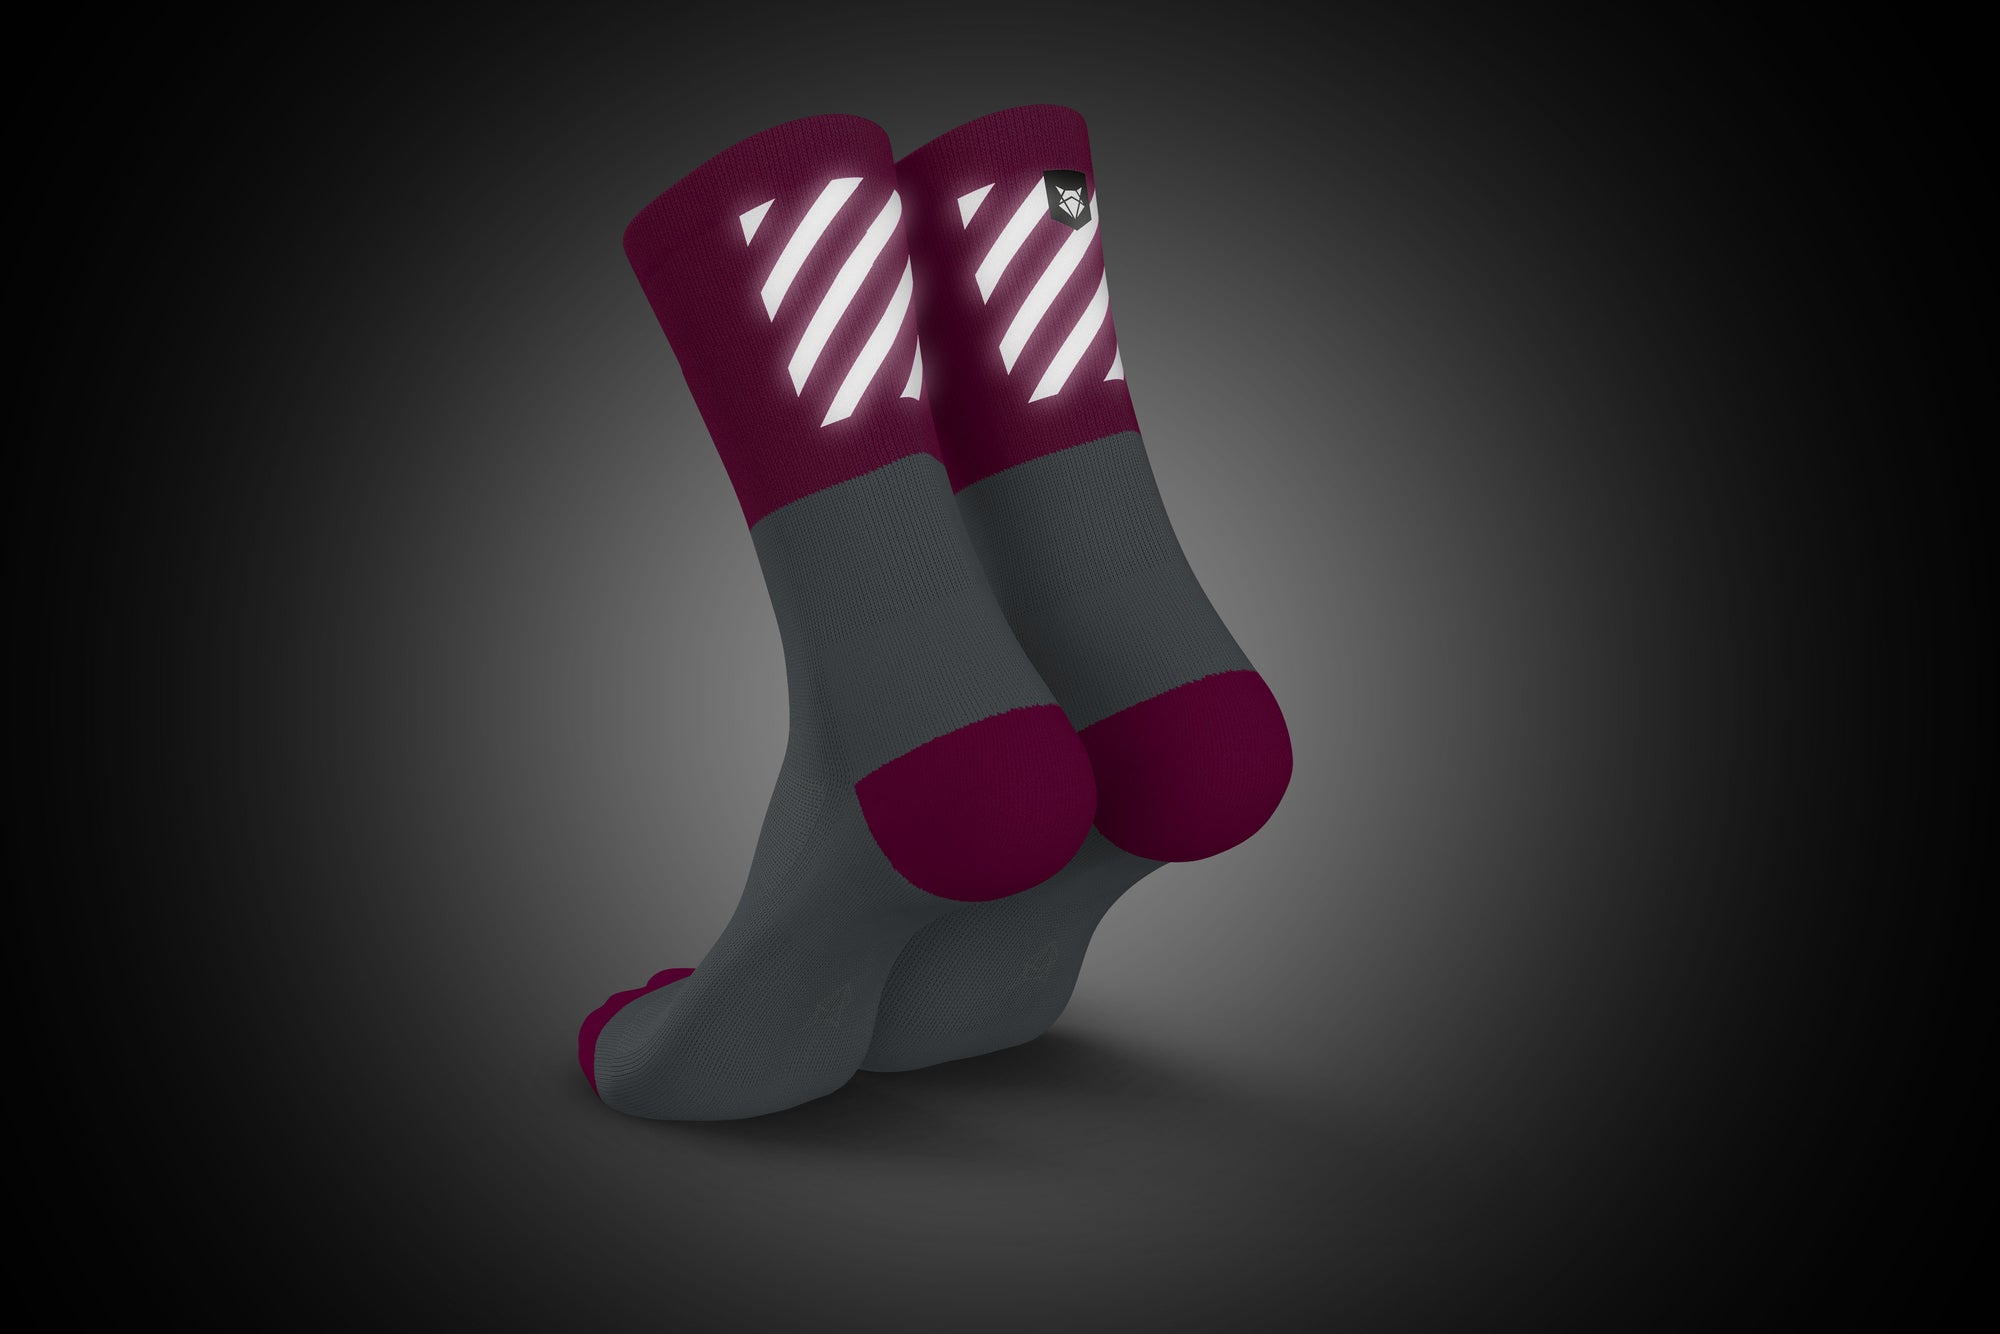 High Viz Pink running socks with reflective strip for visibility in the dark